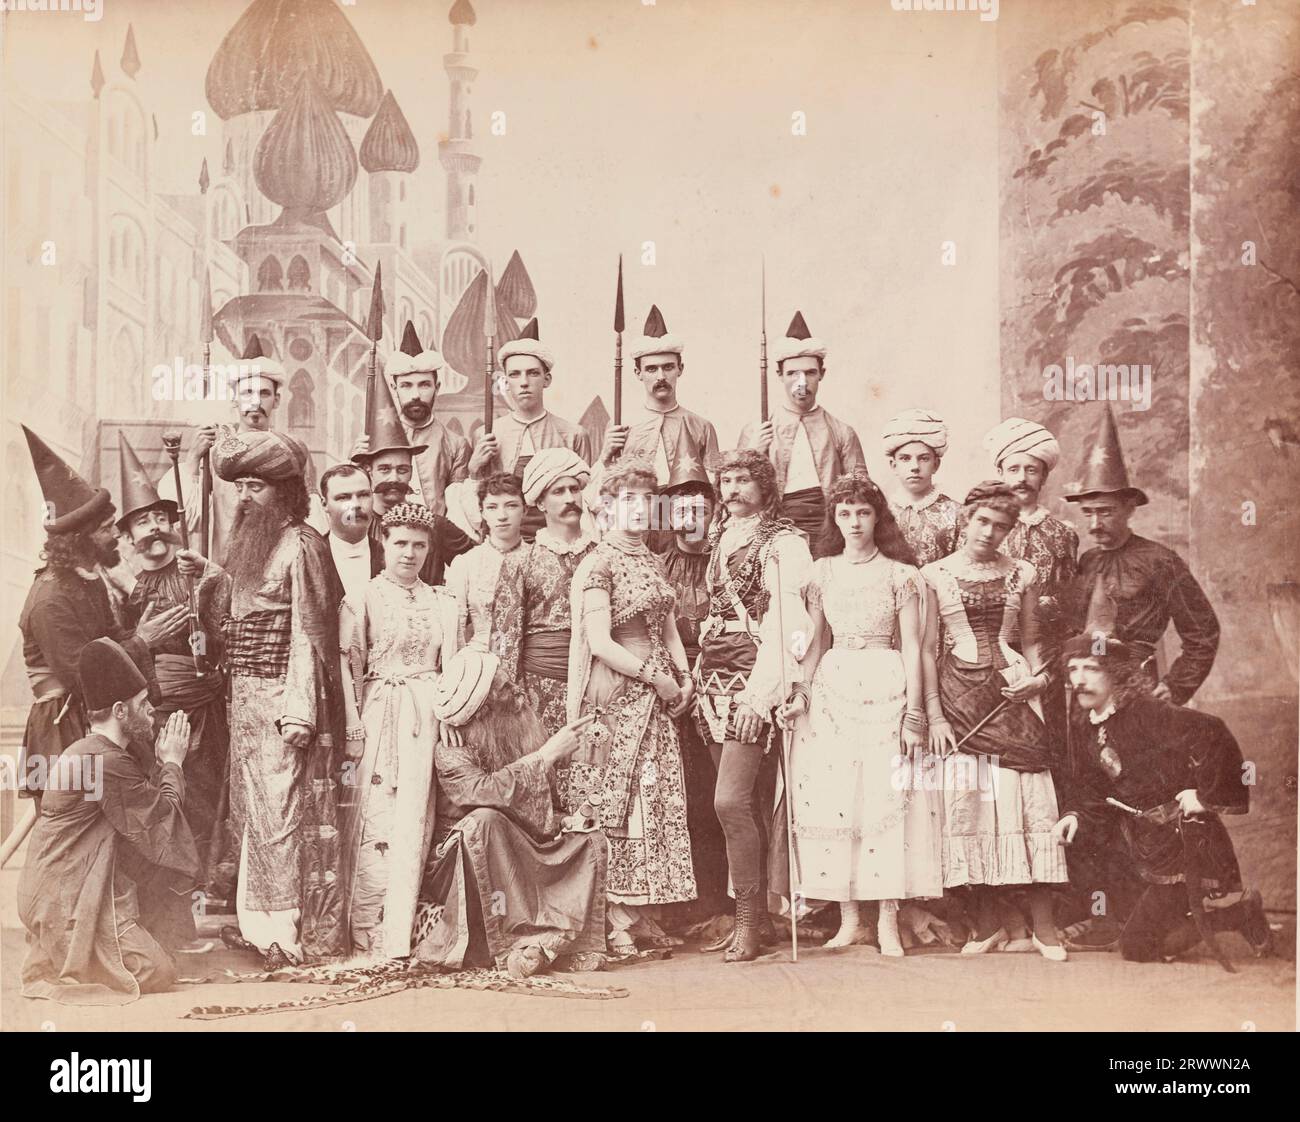 Group portrait of European men and women dressed in costumes for a theatrical production of Lalla Rookh. They pose on a stage with painted backdrops and set behind them, dressed in a variety of orientalist and medieval costumes. Lalla Rookh is a romance by Thomas Moore, published in 1817. Caption reads: Lalla Rookh. Stock Photo